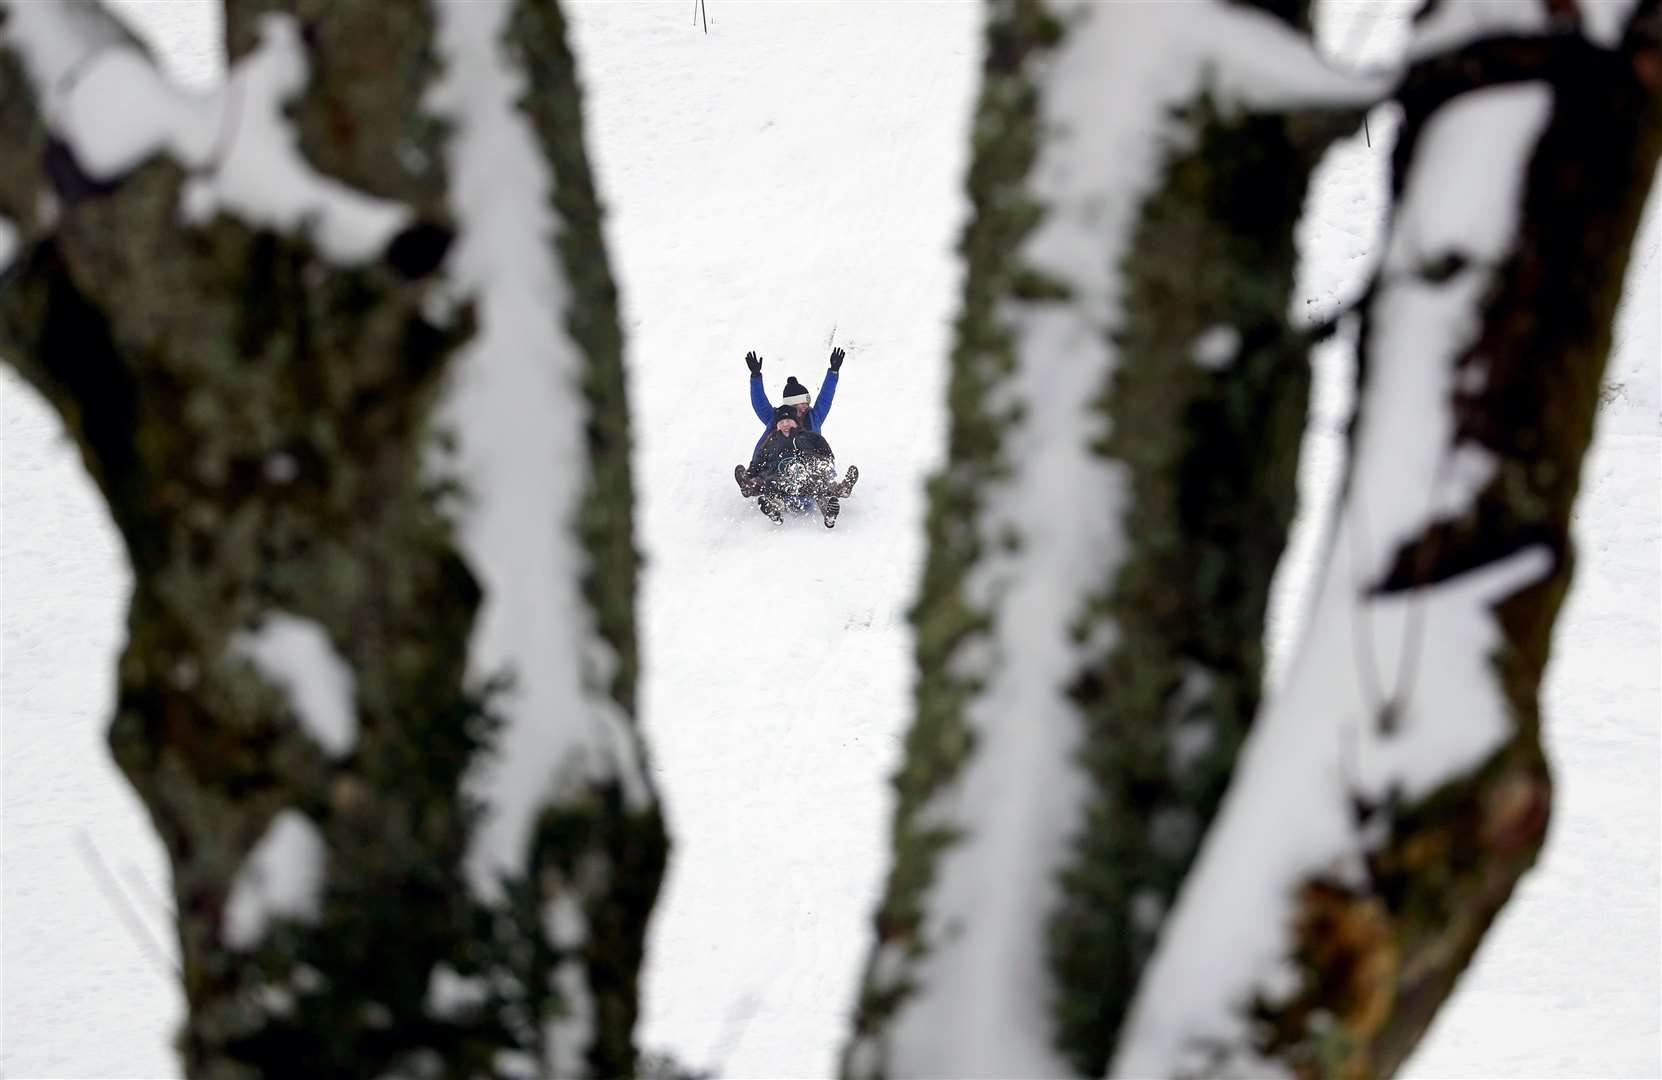 People sledging on the golf course at Gleneagles (Andrew Milligan/PA)